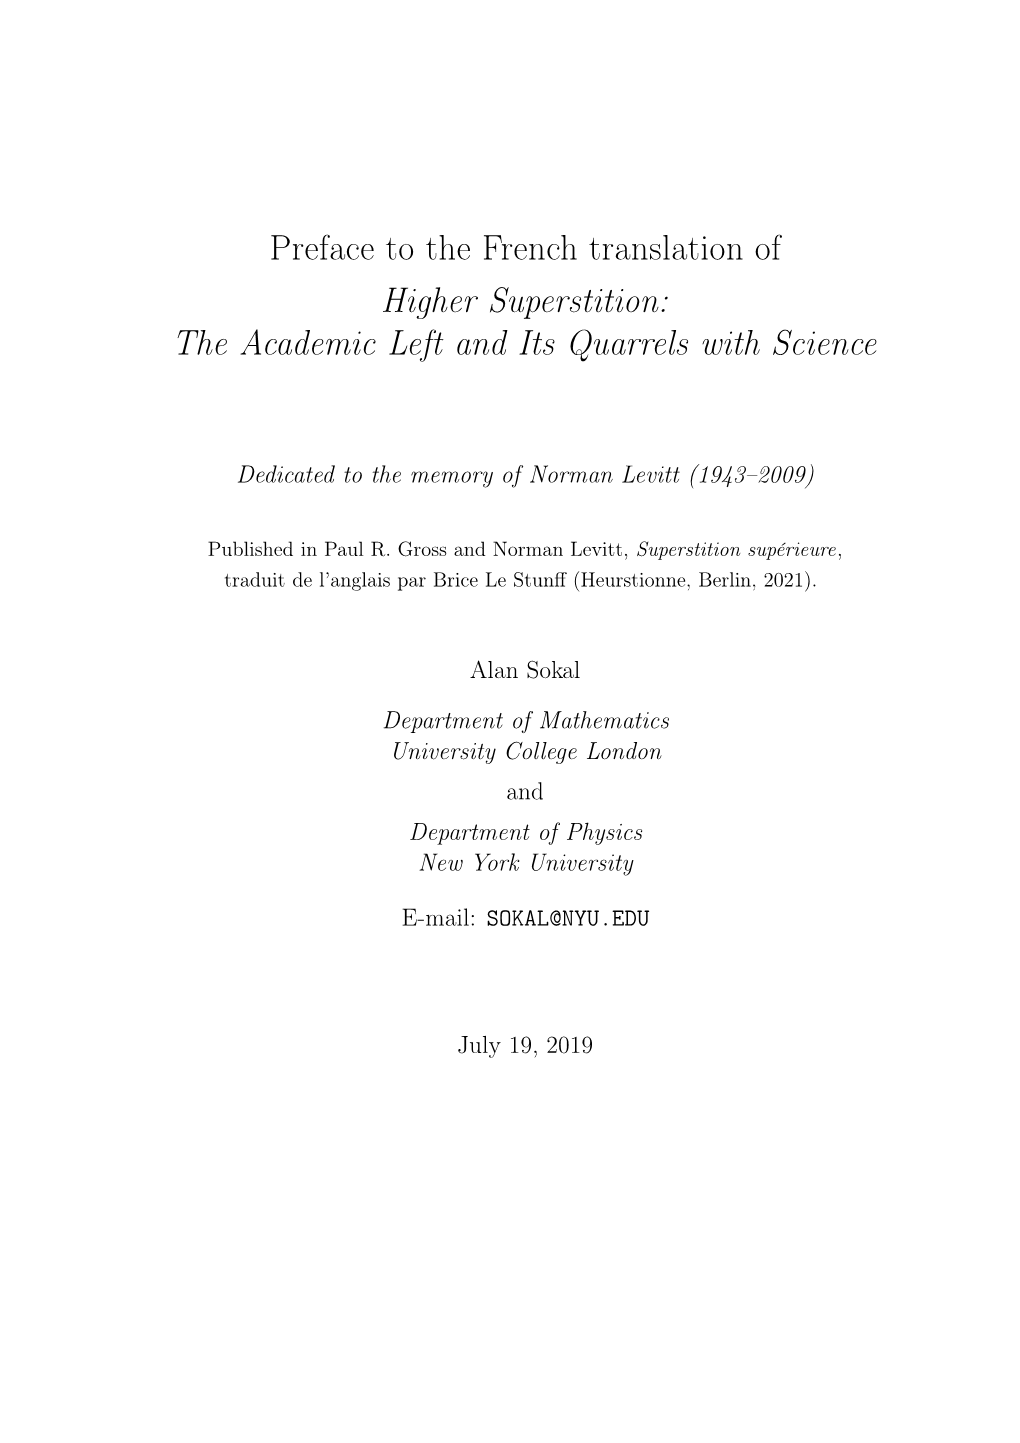 Preface to the French Edition of Gross + Levitt, Higher Superstition